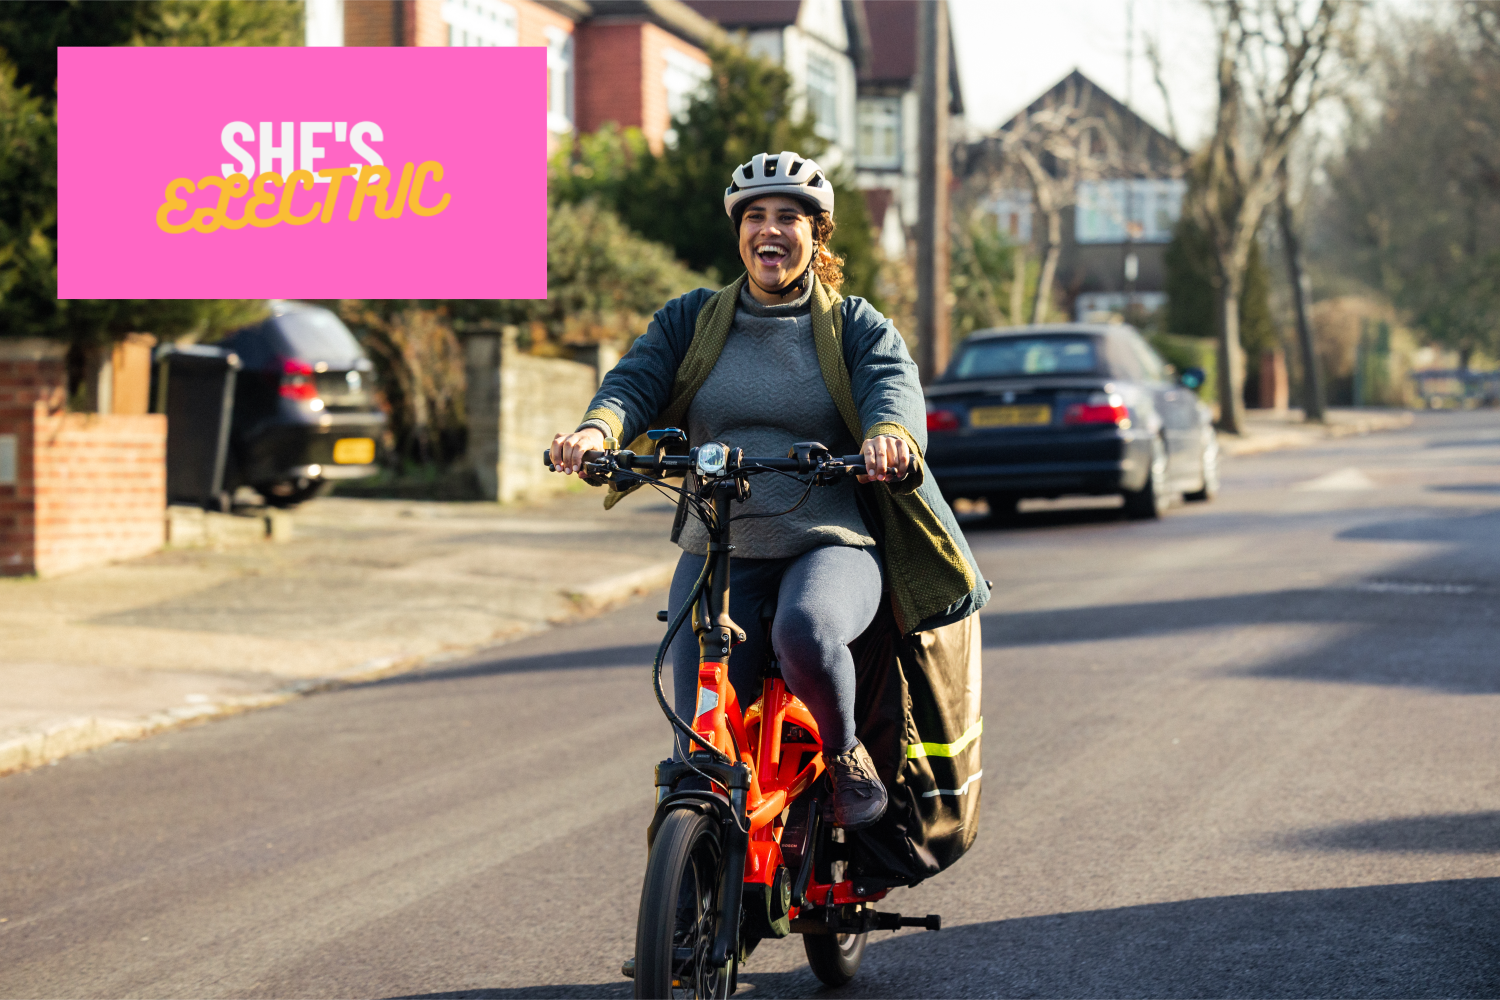 Elan Sey rides a Tern GSD electric bike as part of She's electric campaign